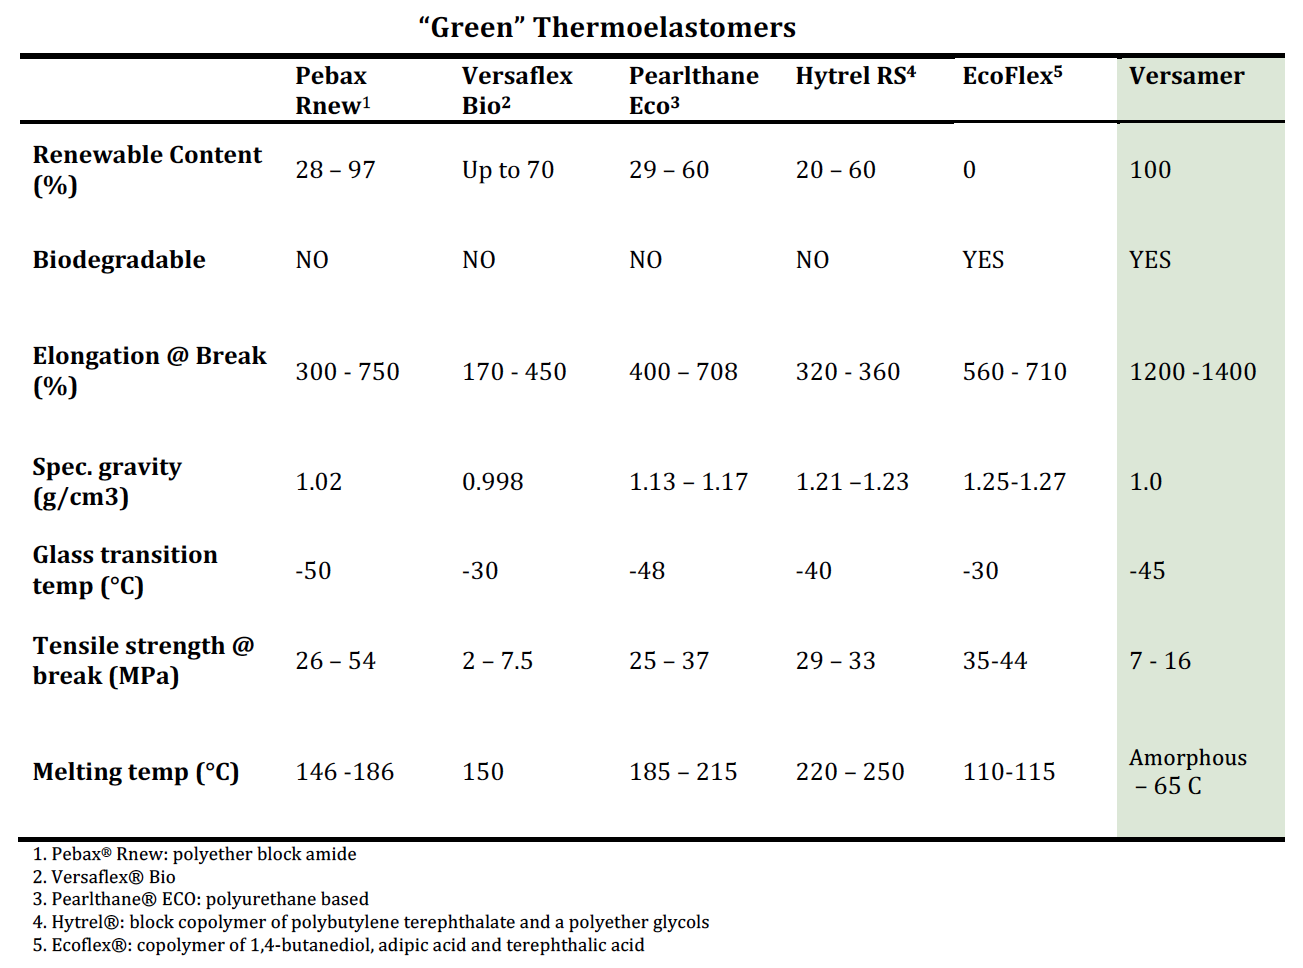 green thermoelastomers table